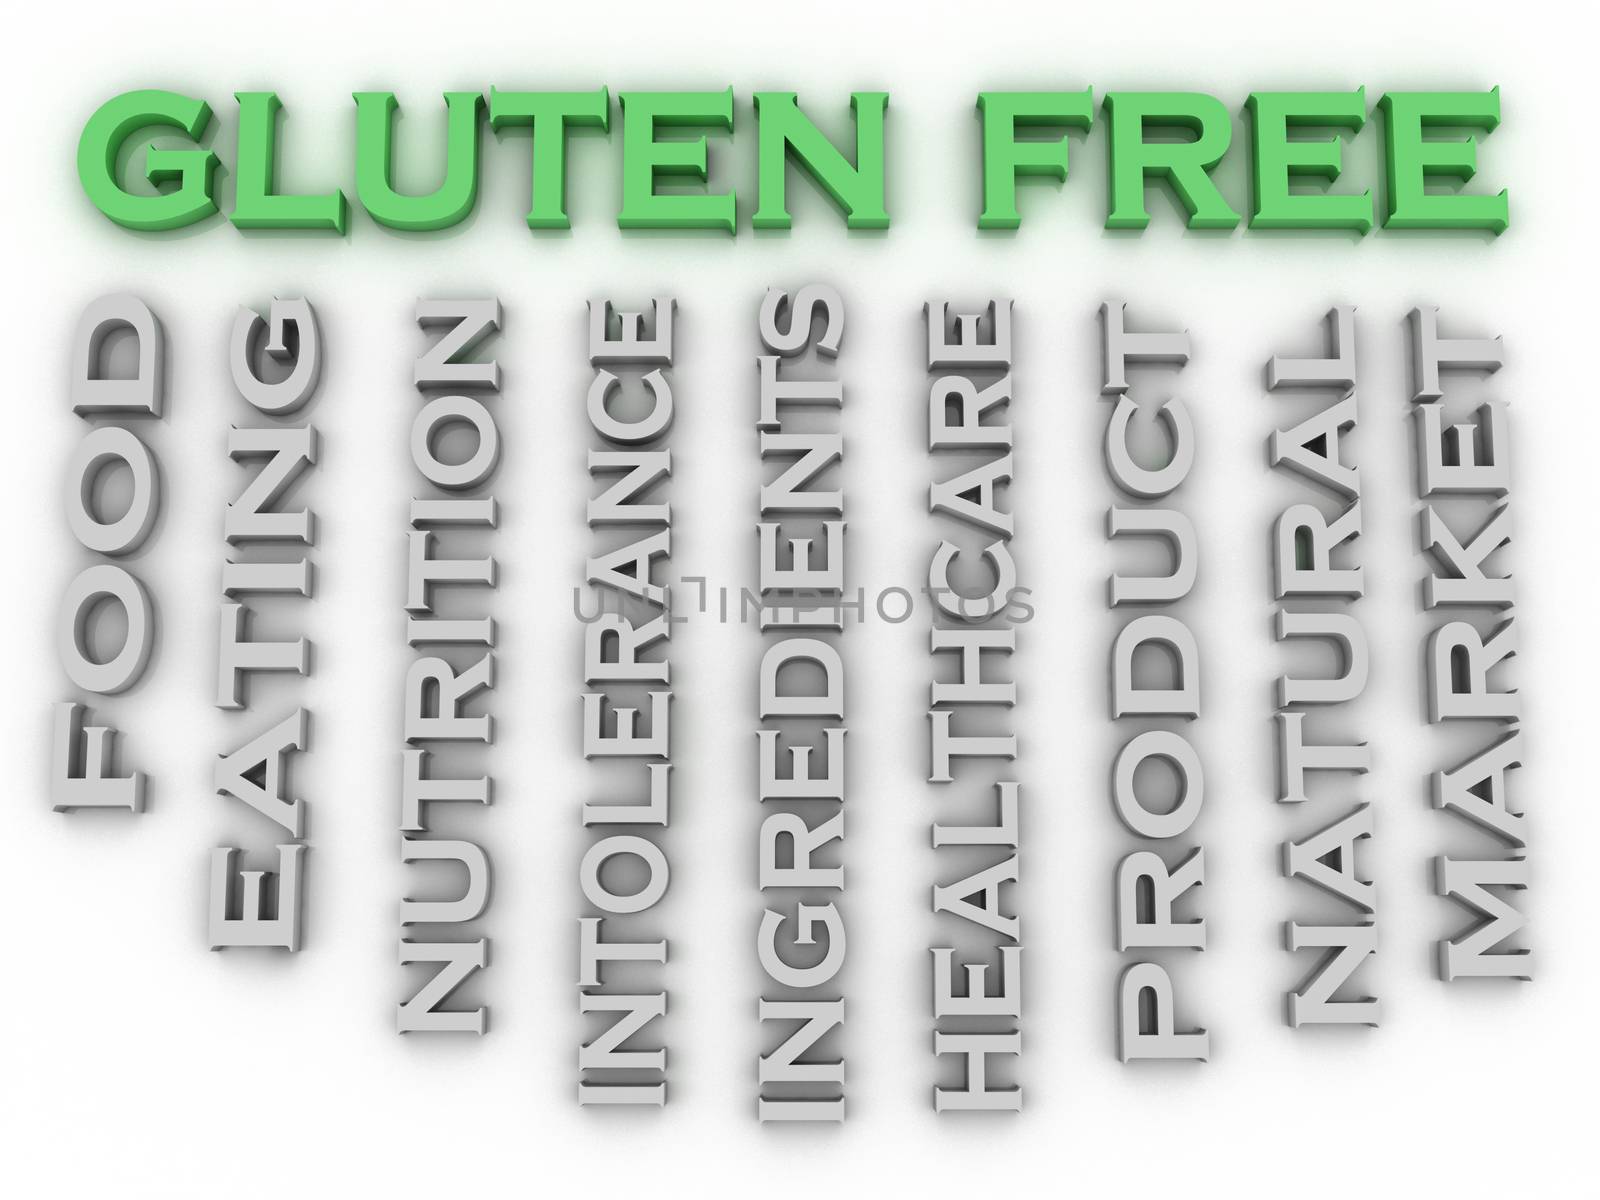 3d image Gluten free issues concept word cloud background by dacasdo